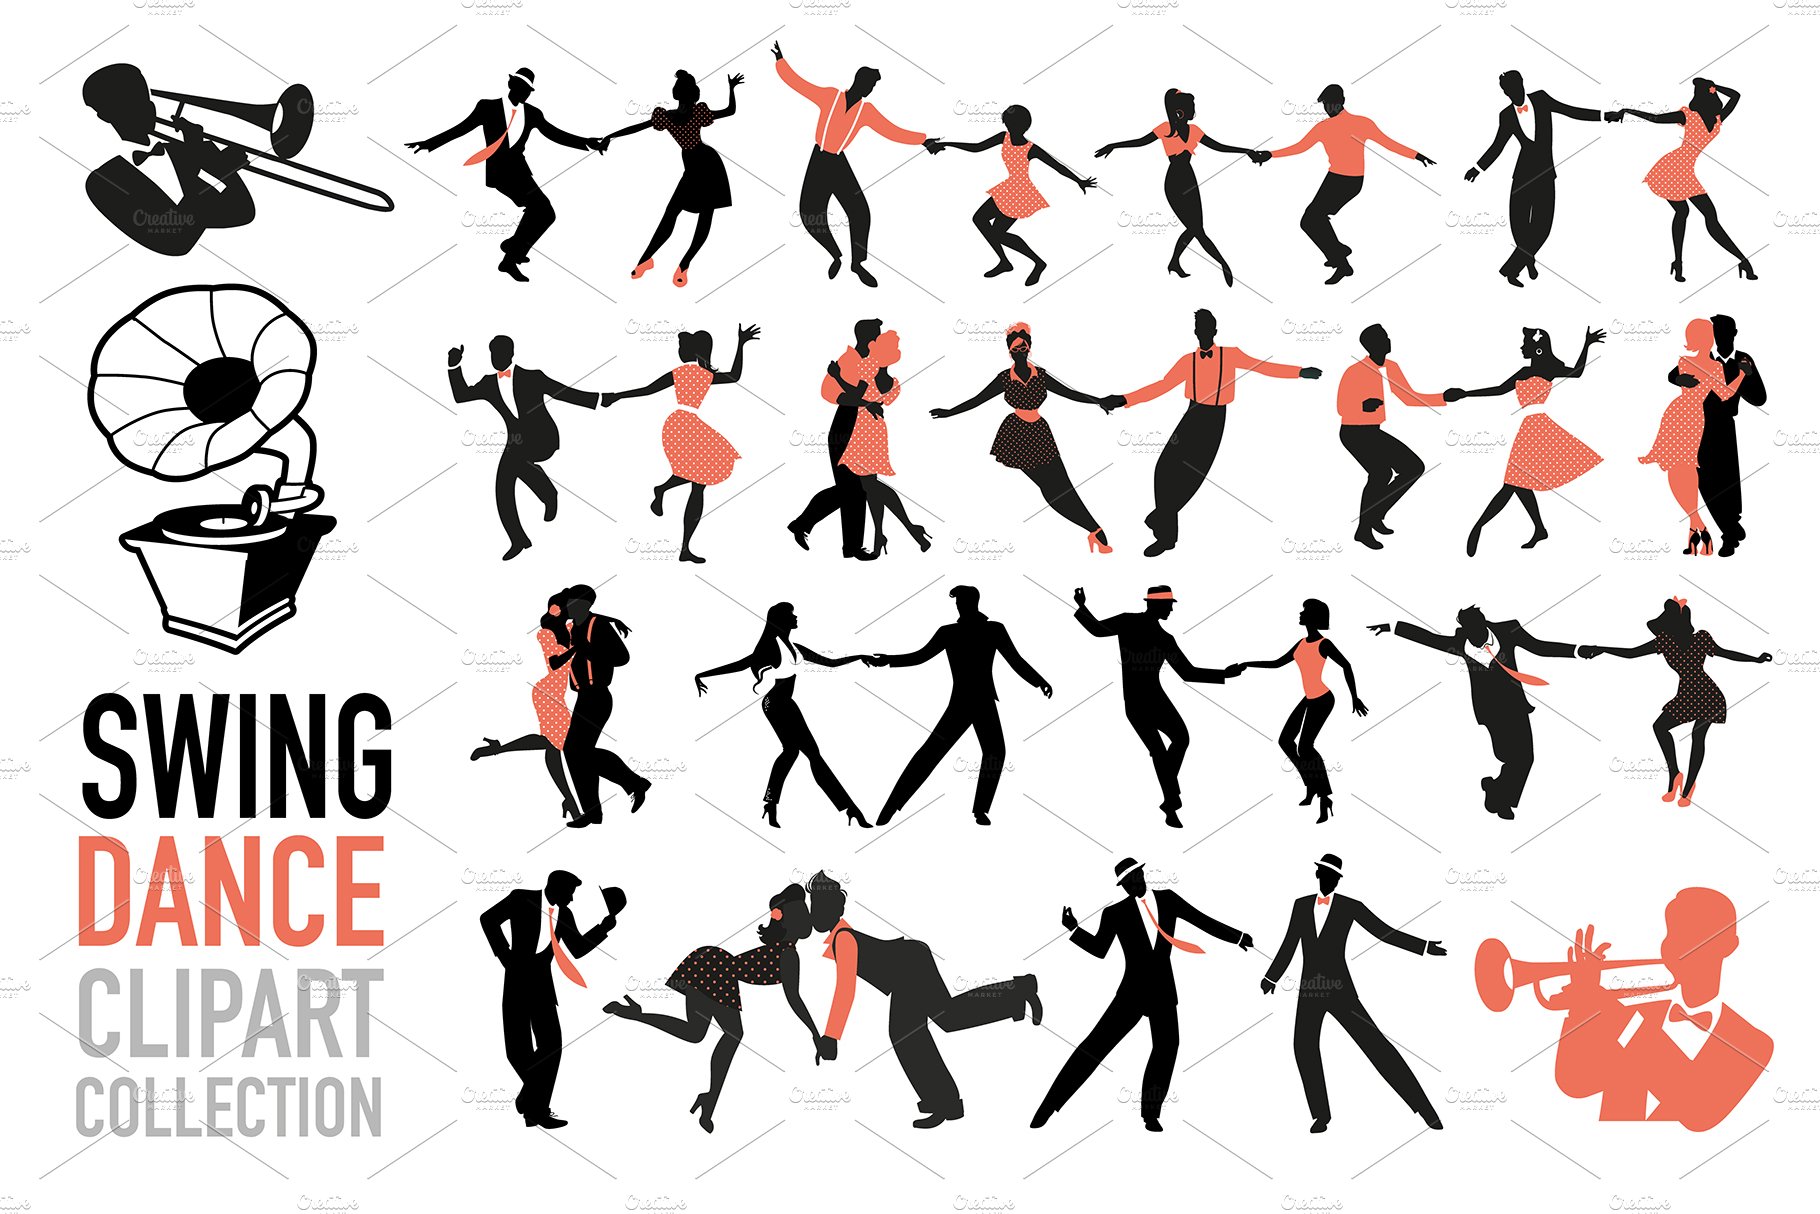 SWING DANCE CLIPART cover image.